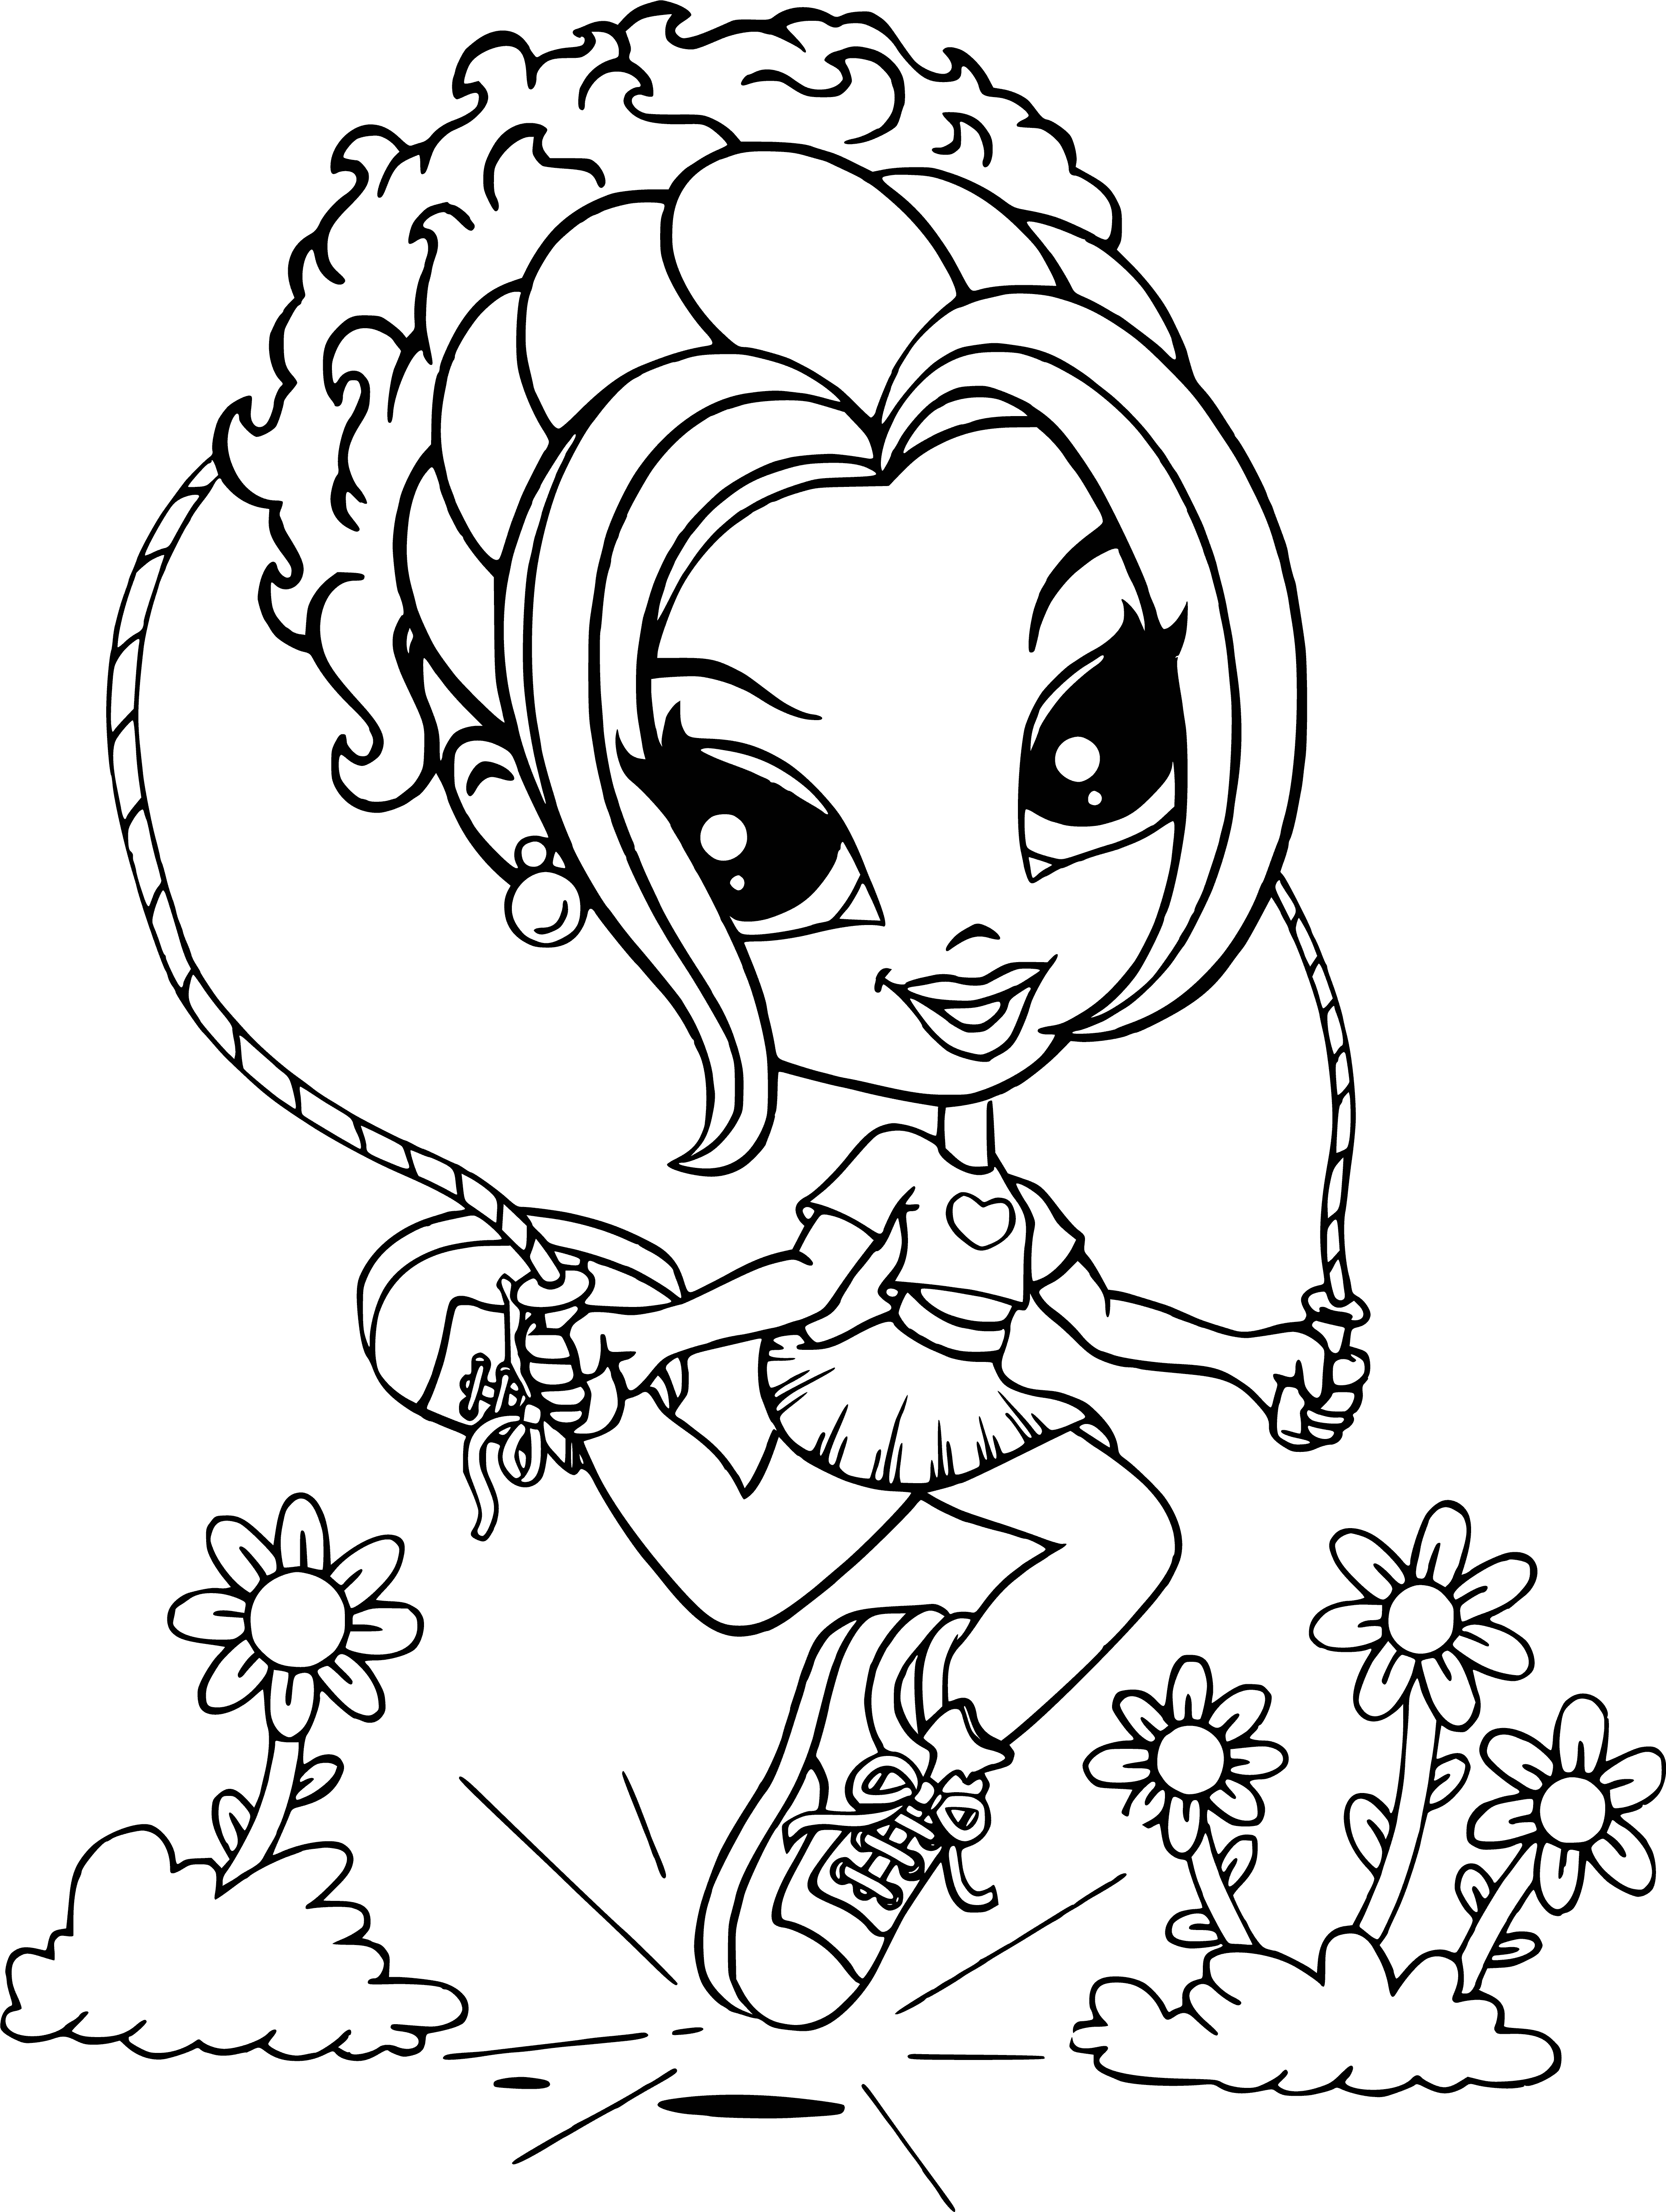 coloring page: Young woman in pink dress, wavy hair and feathered boa seductively gazing with black eyeliner and lips, large hoop earrings.